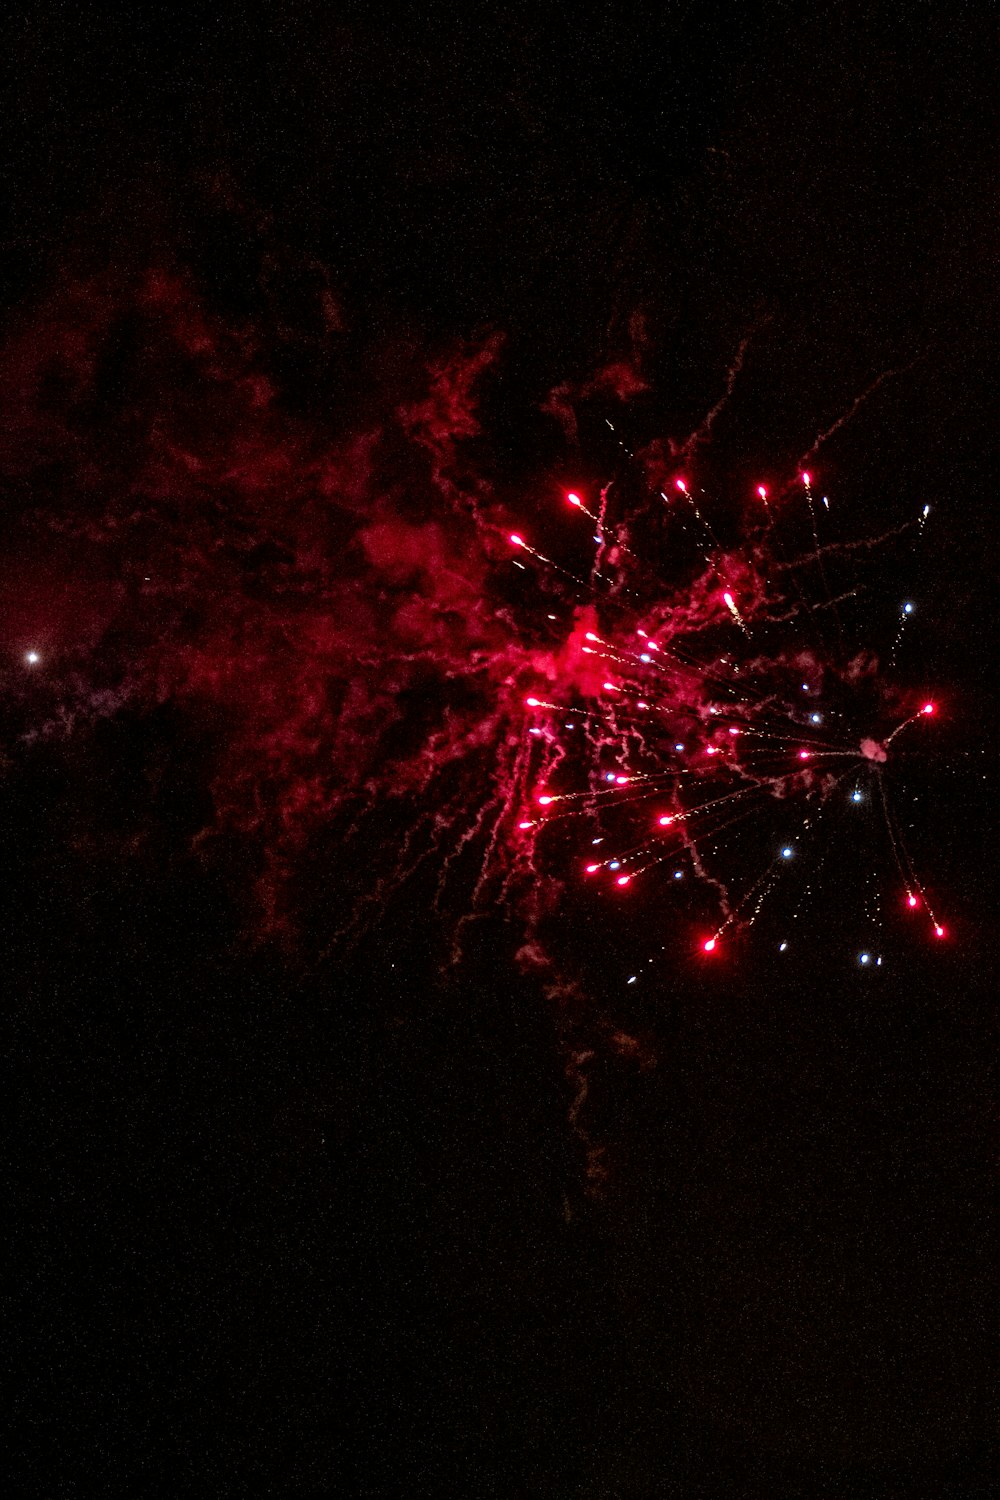 red fireworks in the sky during night time